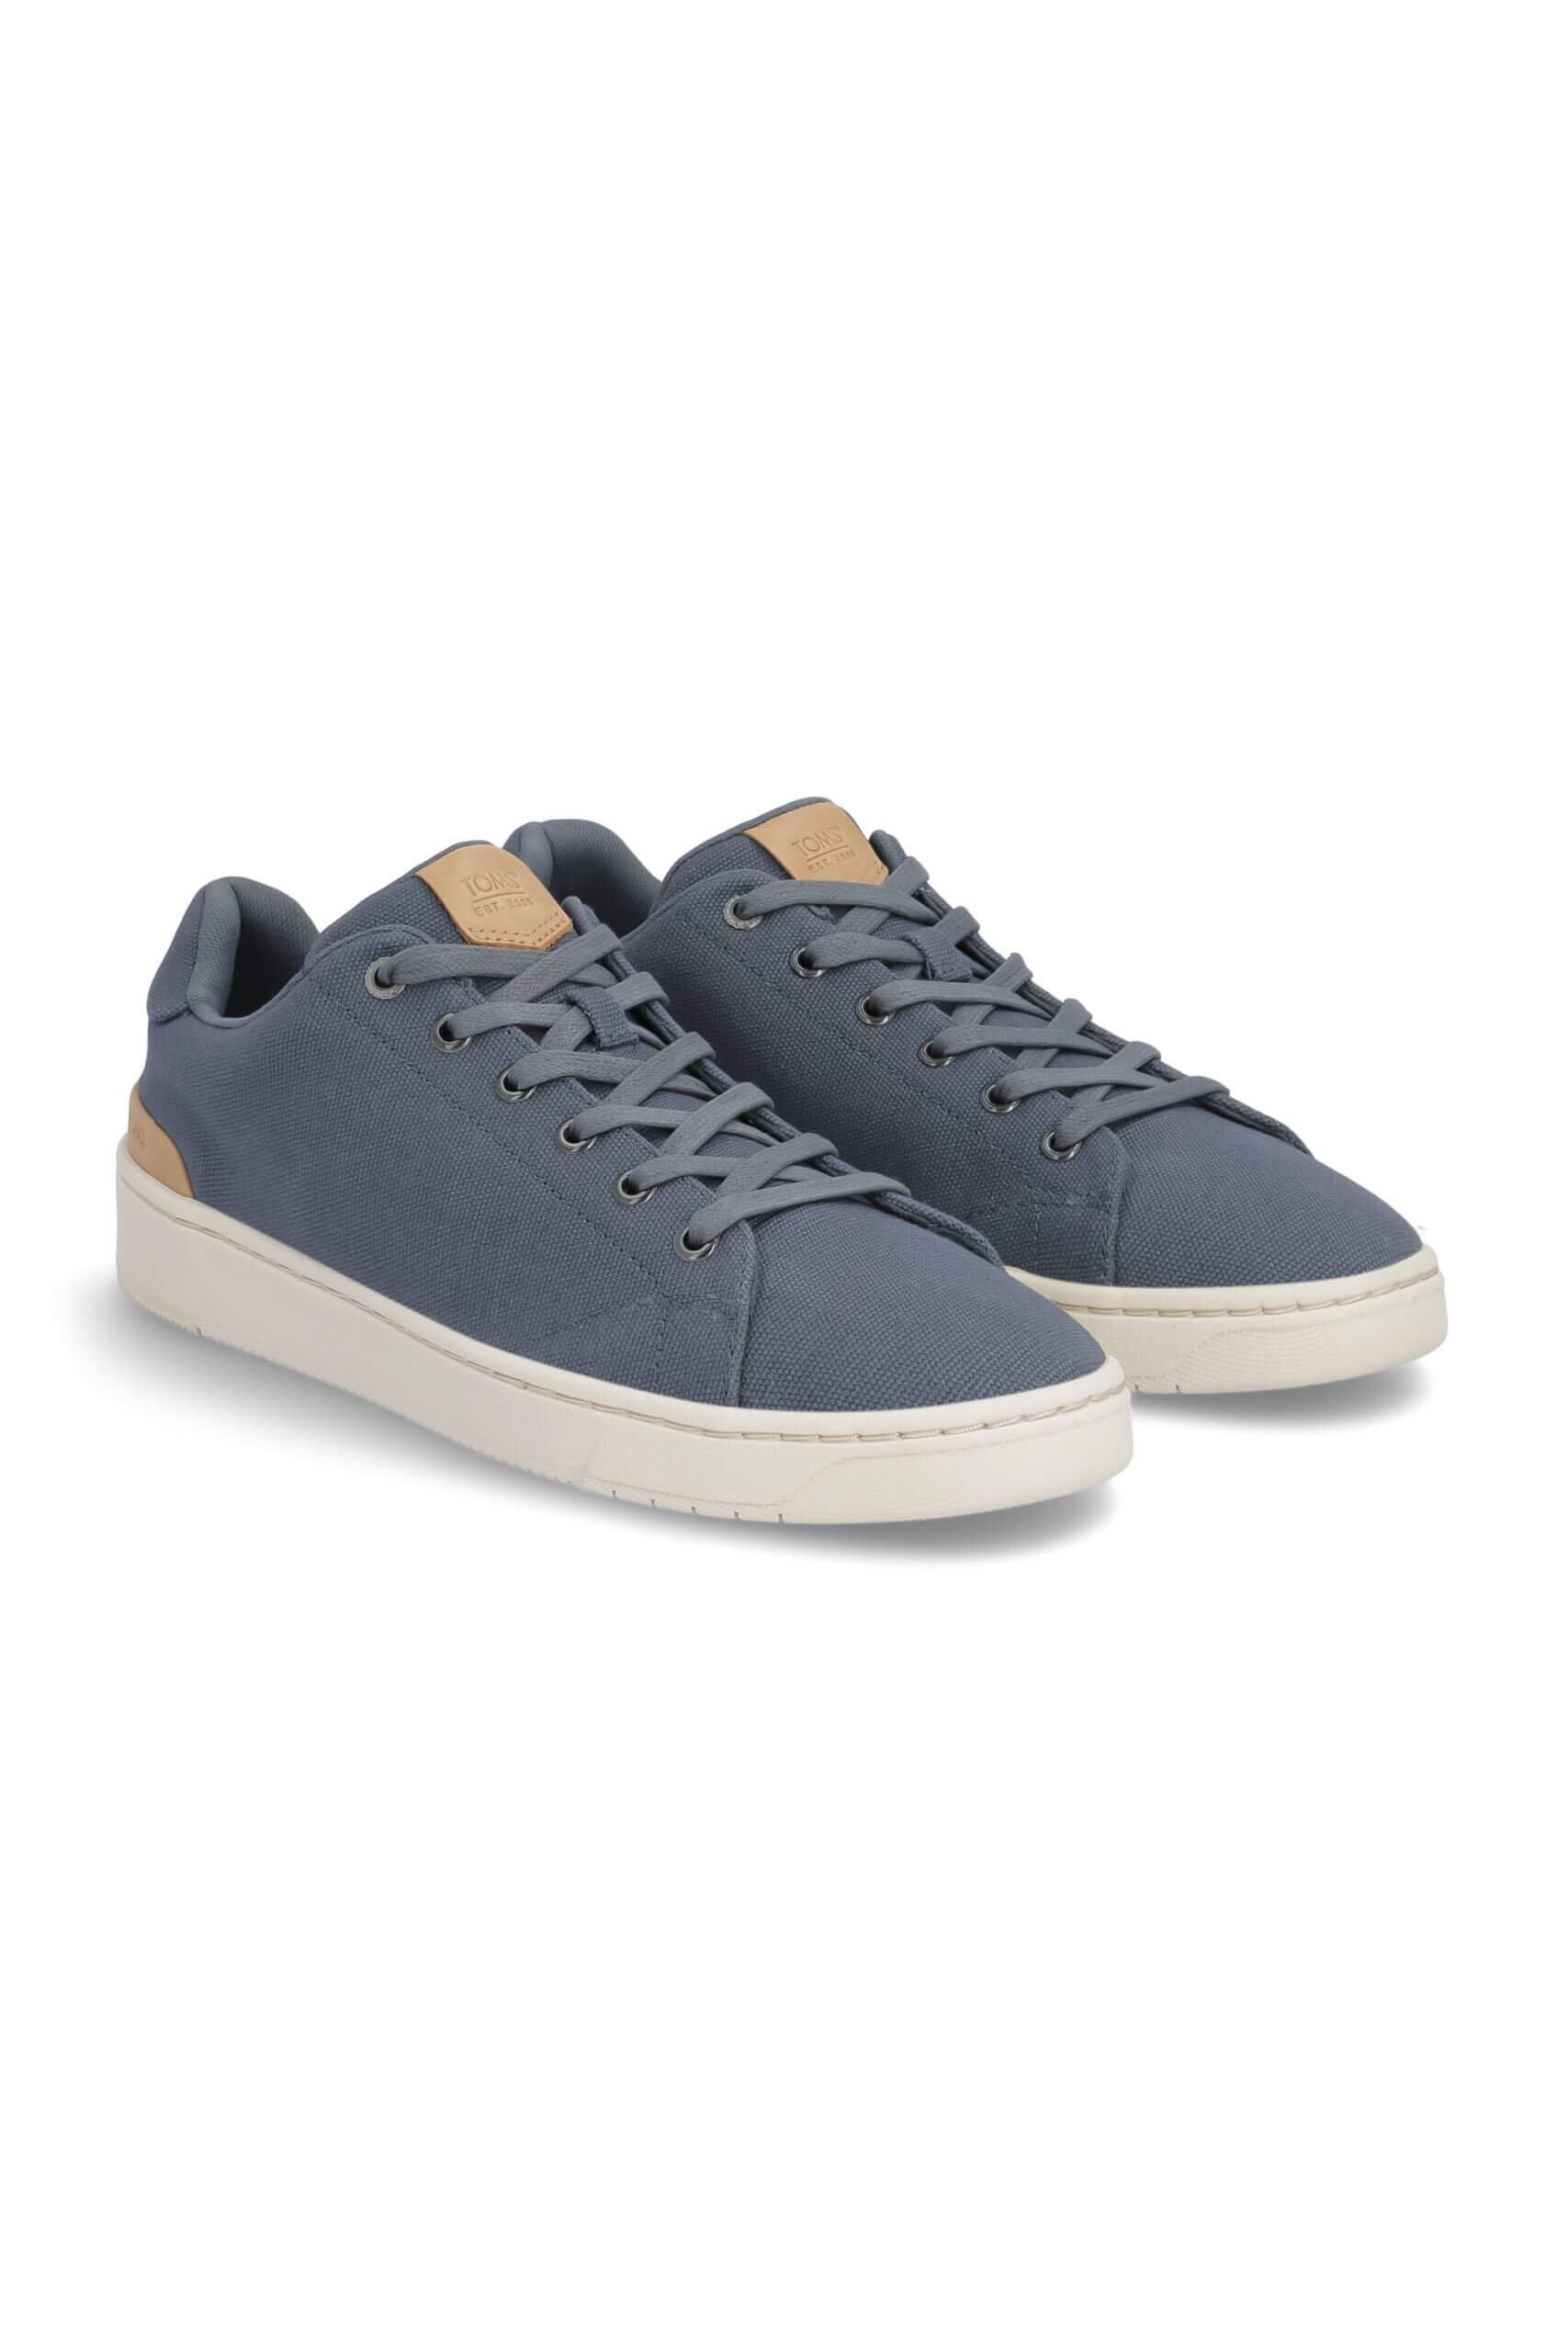 Stitch Fix men’s navy and tan suede sneakers with off-white soles.